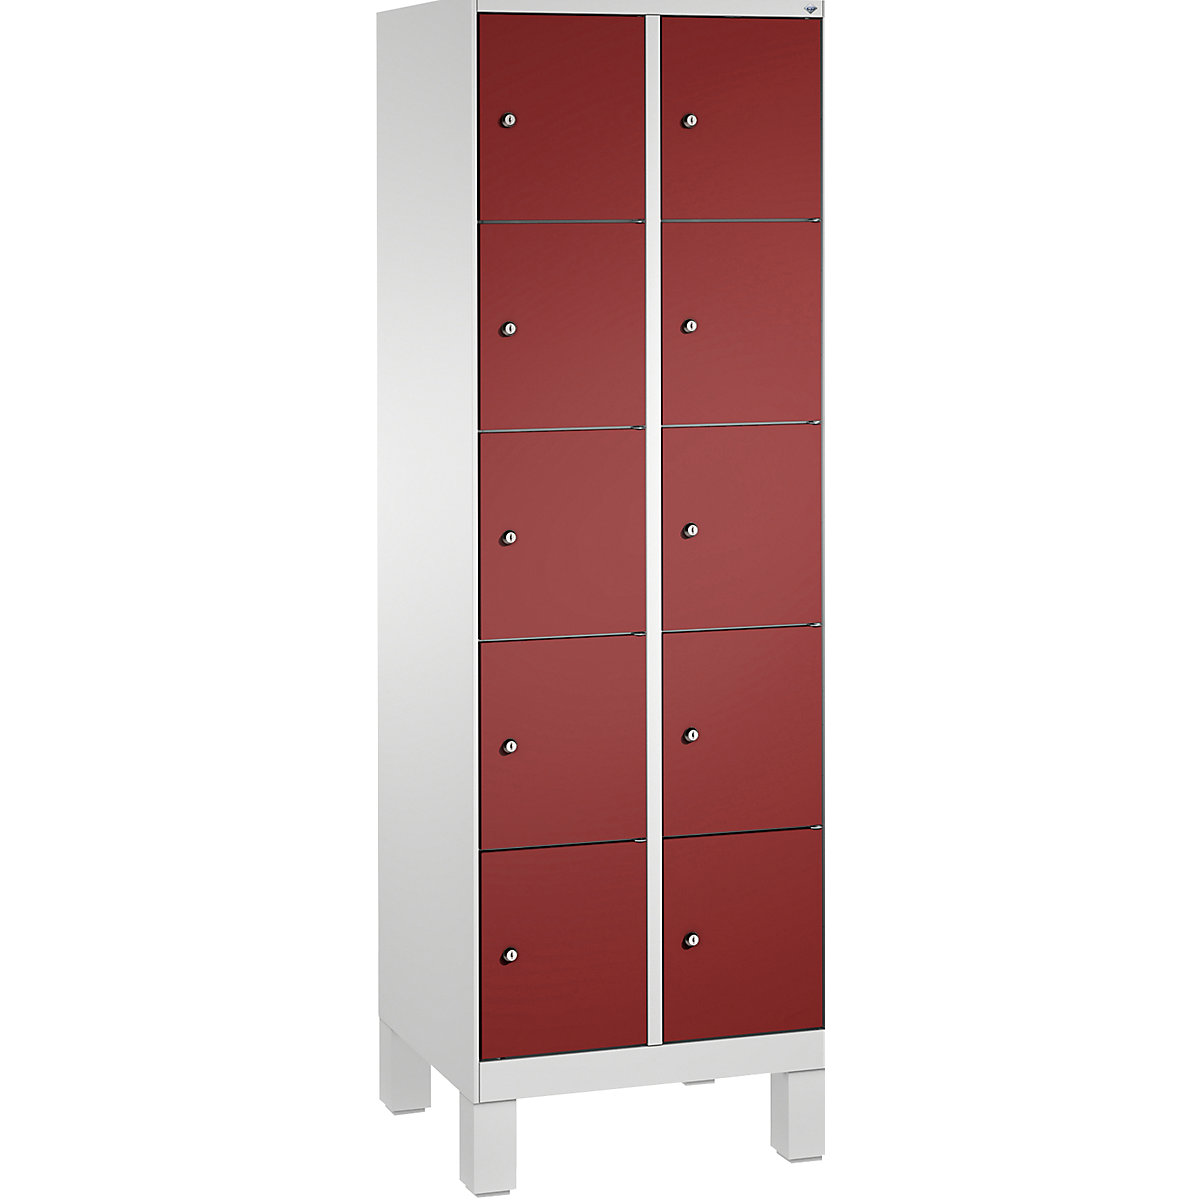 EVOLO locker unit, with feet – C+P, 2 compartments, 5 shelf compartments each, compartment width 300 mm, light grey / ruby red-5